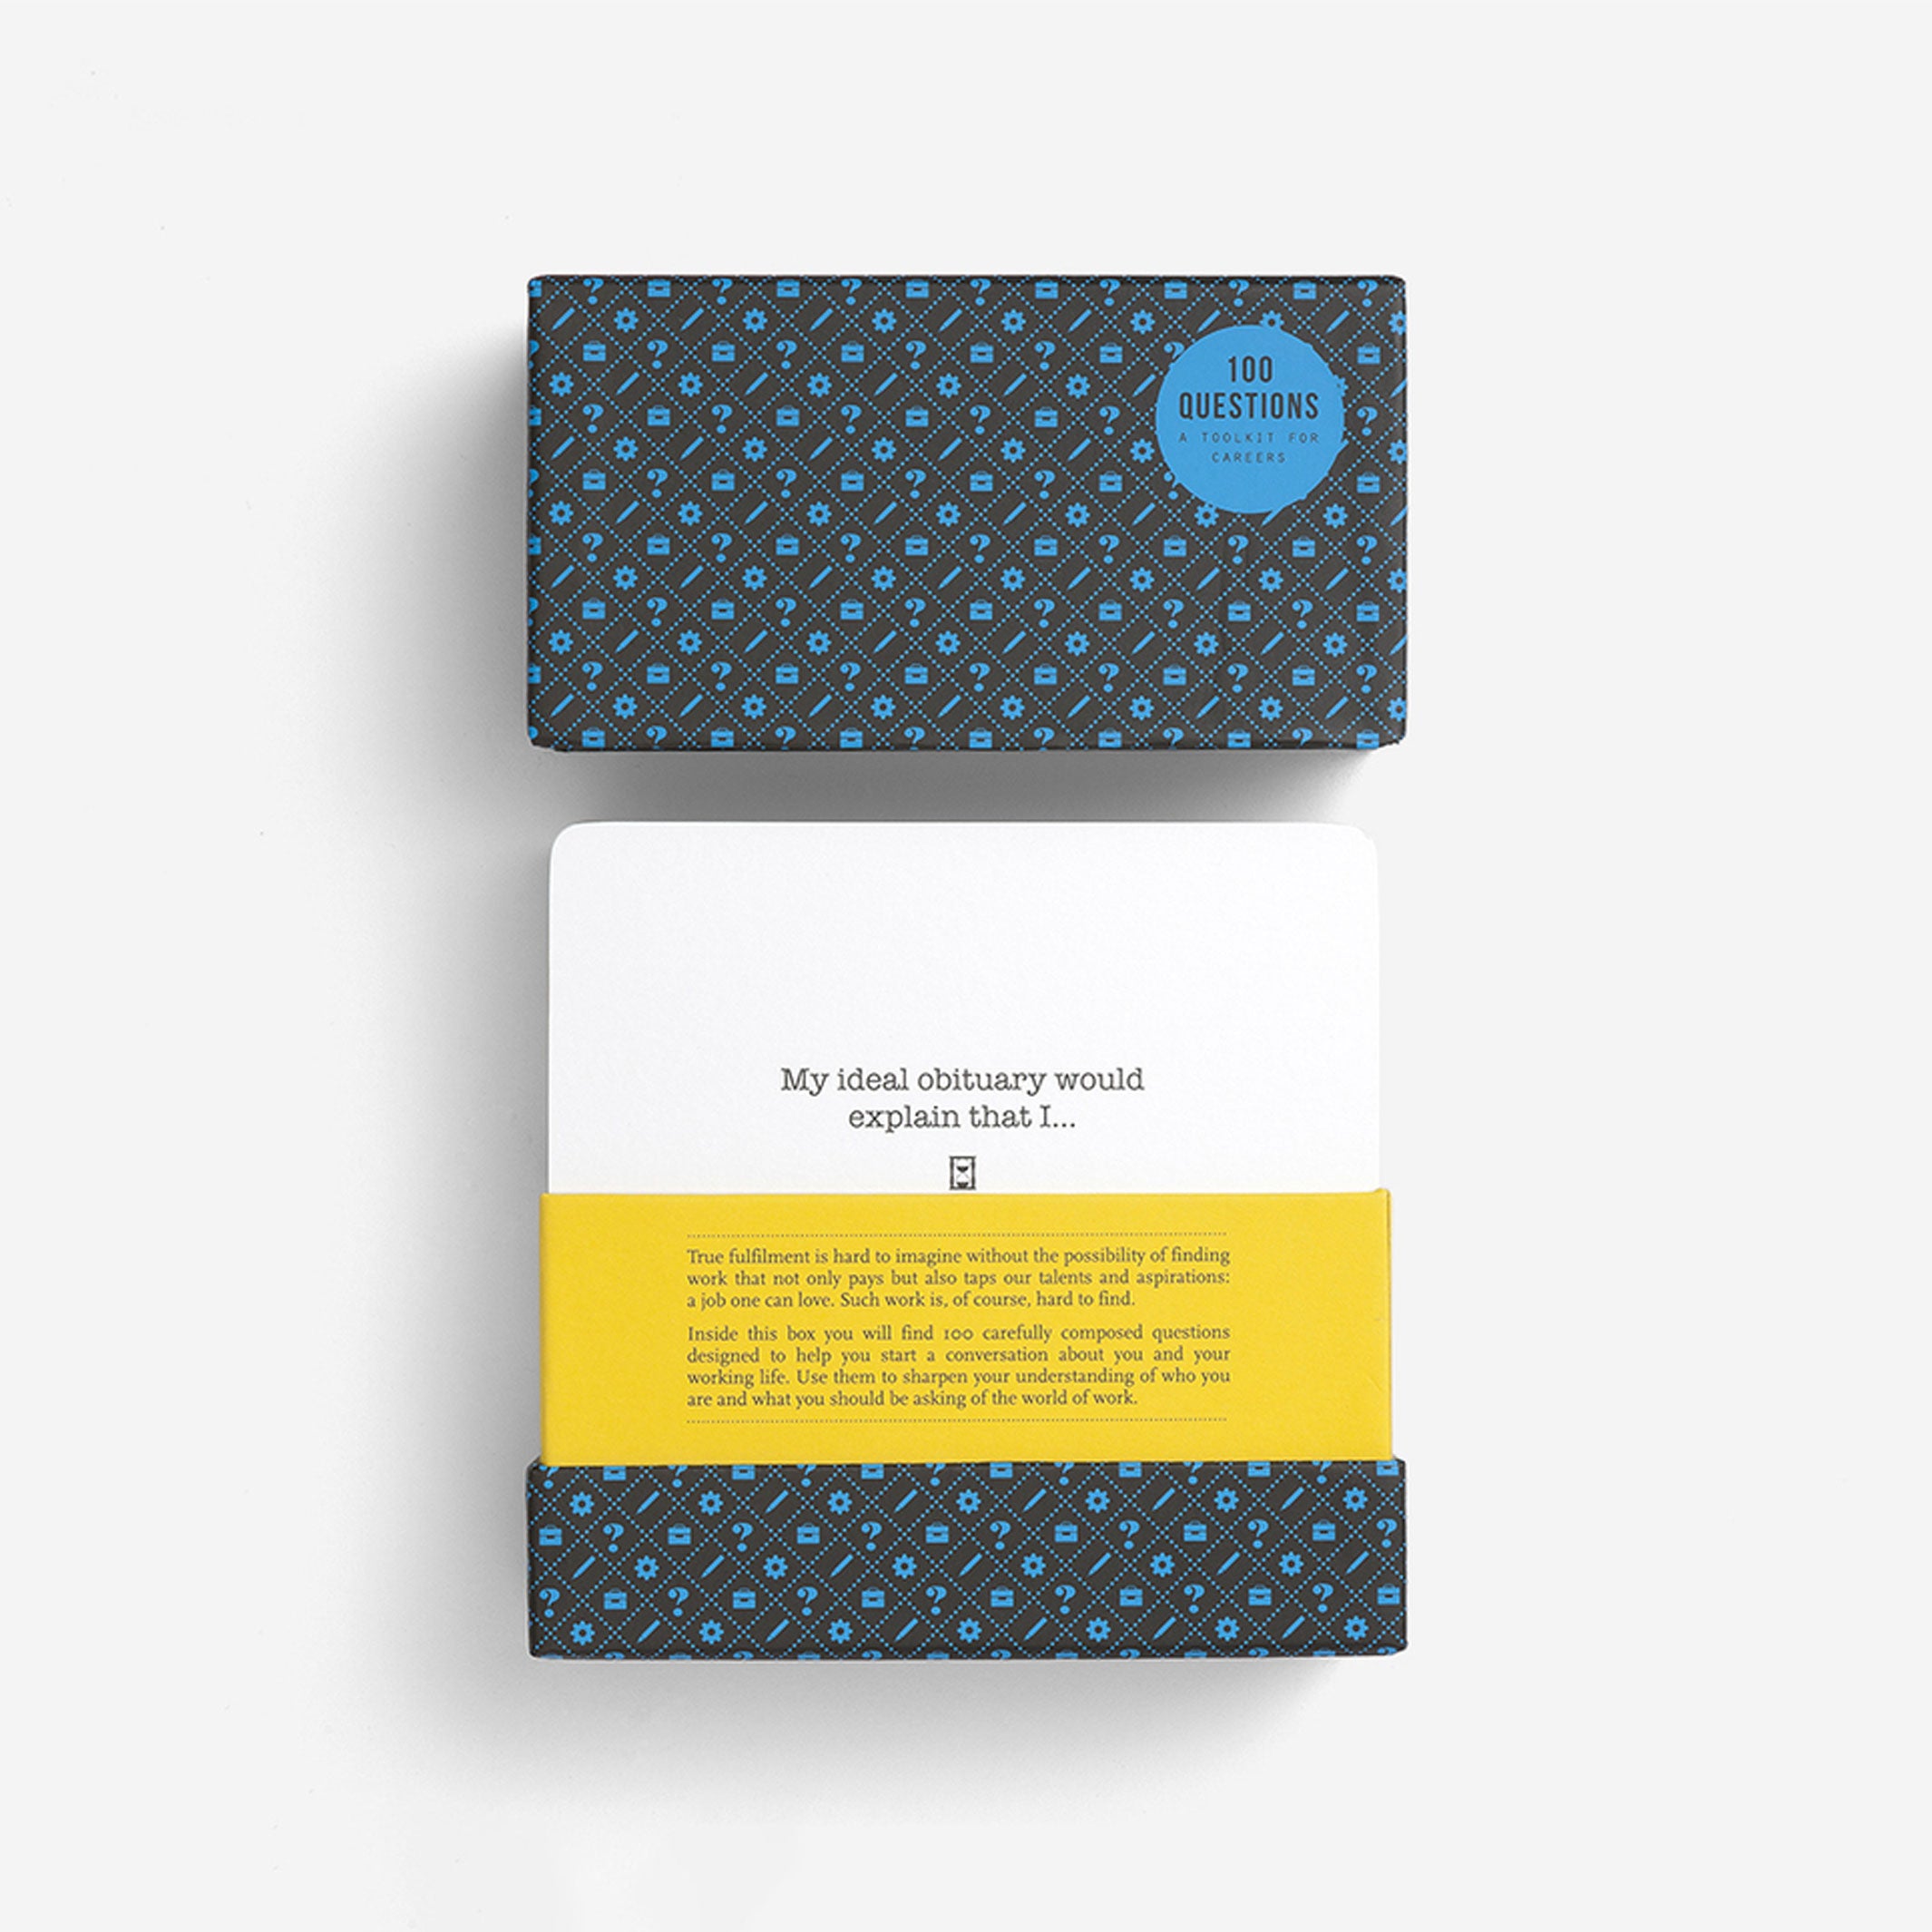 100 QUESTIONS WORK Edition | CARD GAME to spark meaningful conversations around work and careers | English | The School of Life